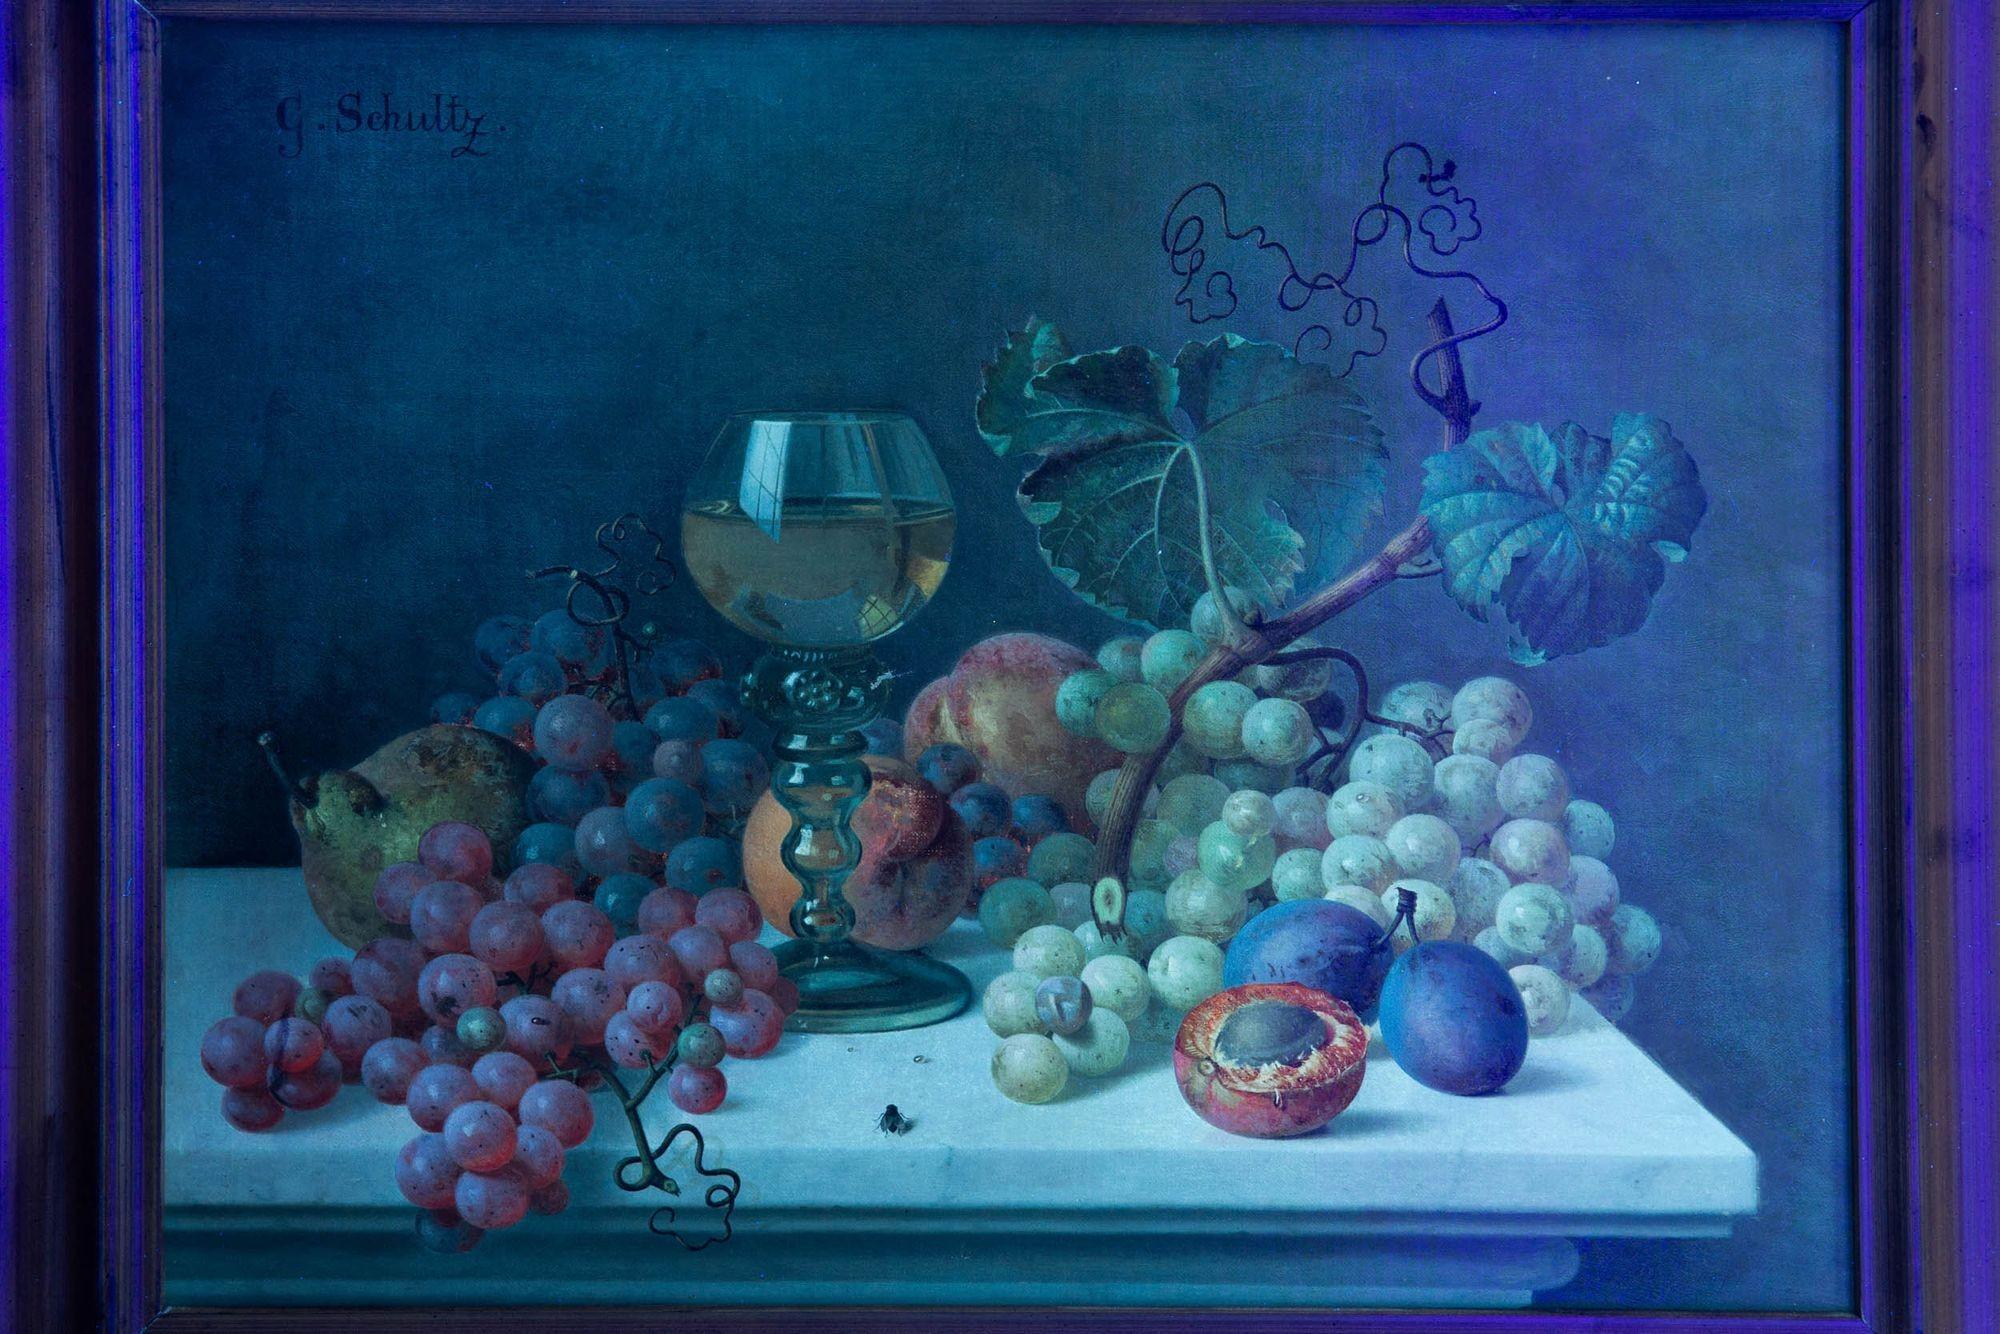 German Realist Still-Life Painting of Fruits and Wine by Gottfried Schultz For Sale 9